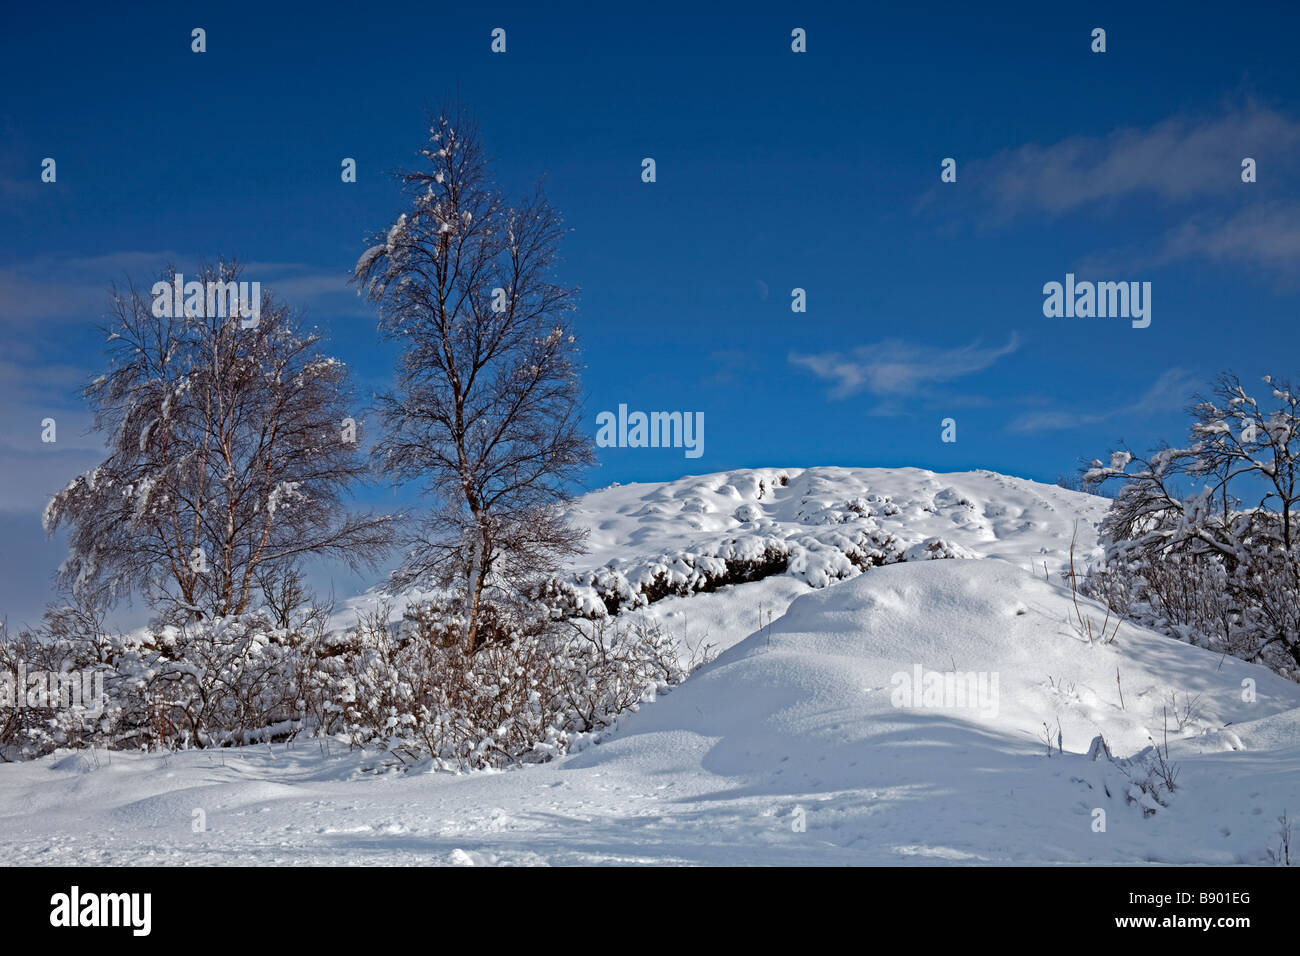 Tree lined snow covered landscape, Rannoch Moor, looking east, Scottish Highlands, Scotland, UK, Europe Stock Photo